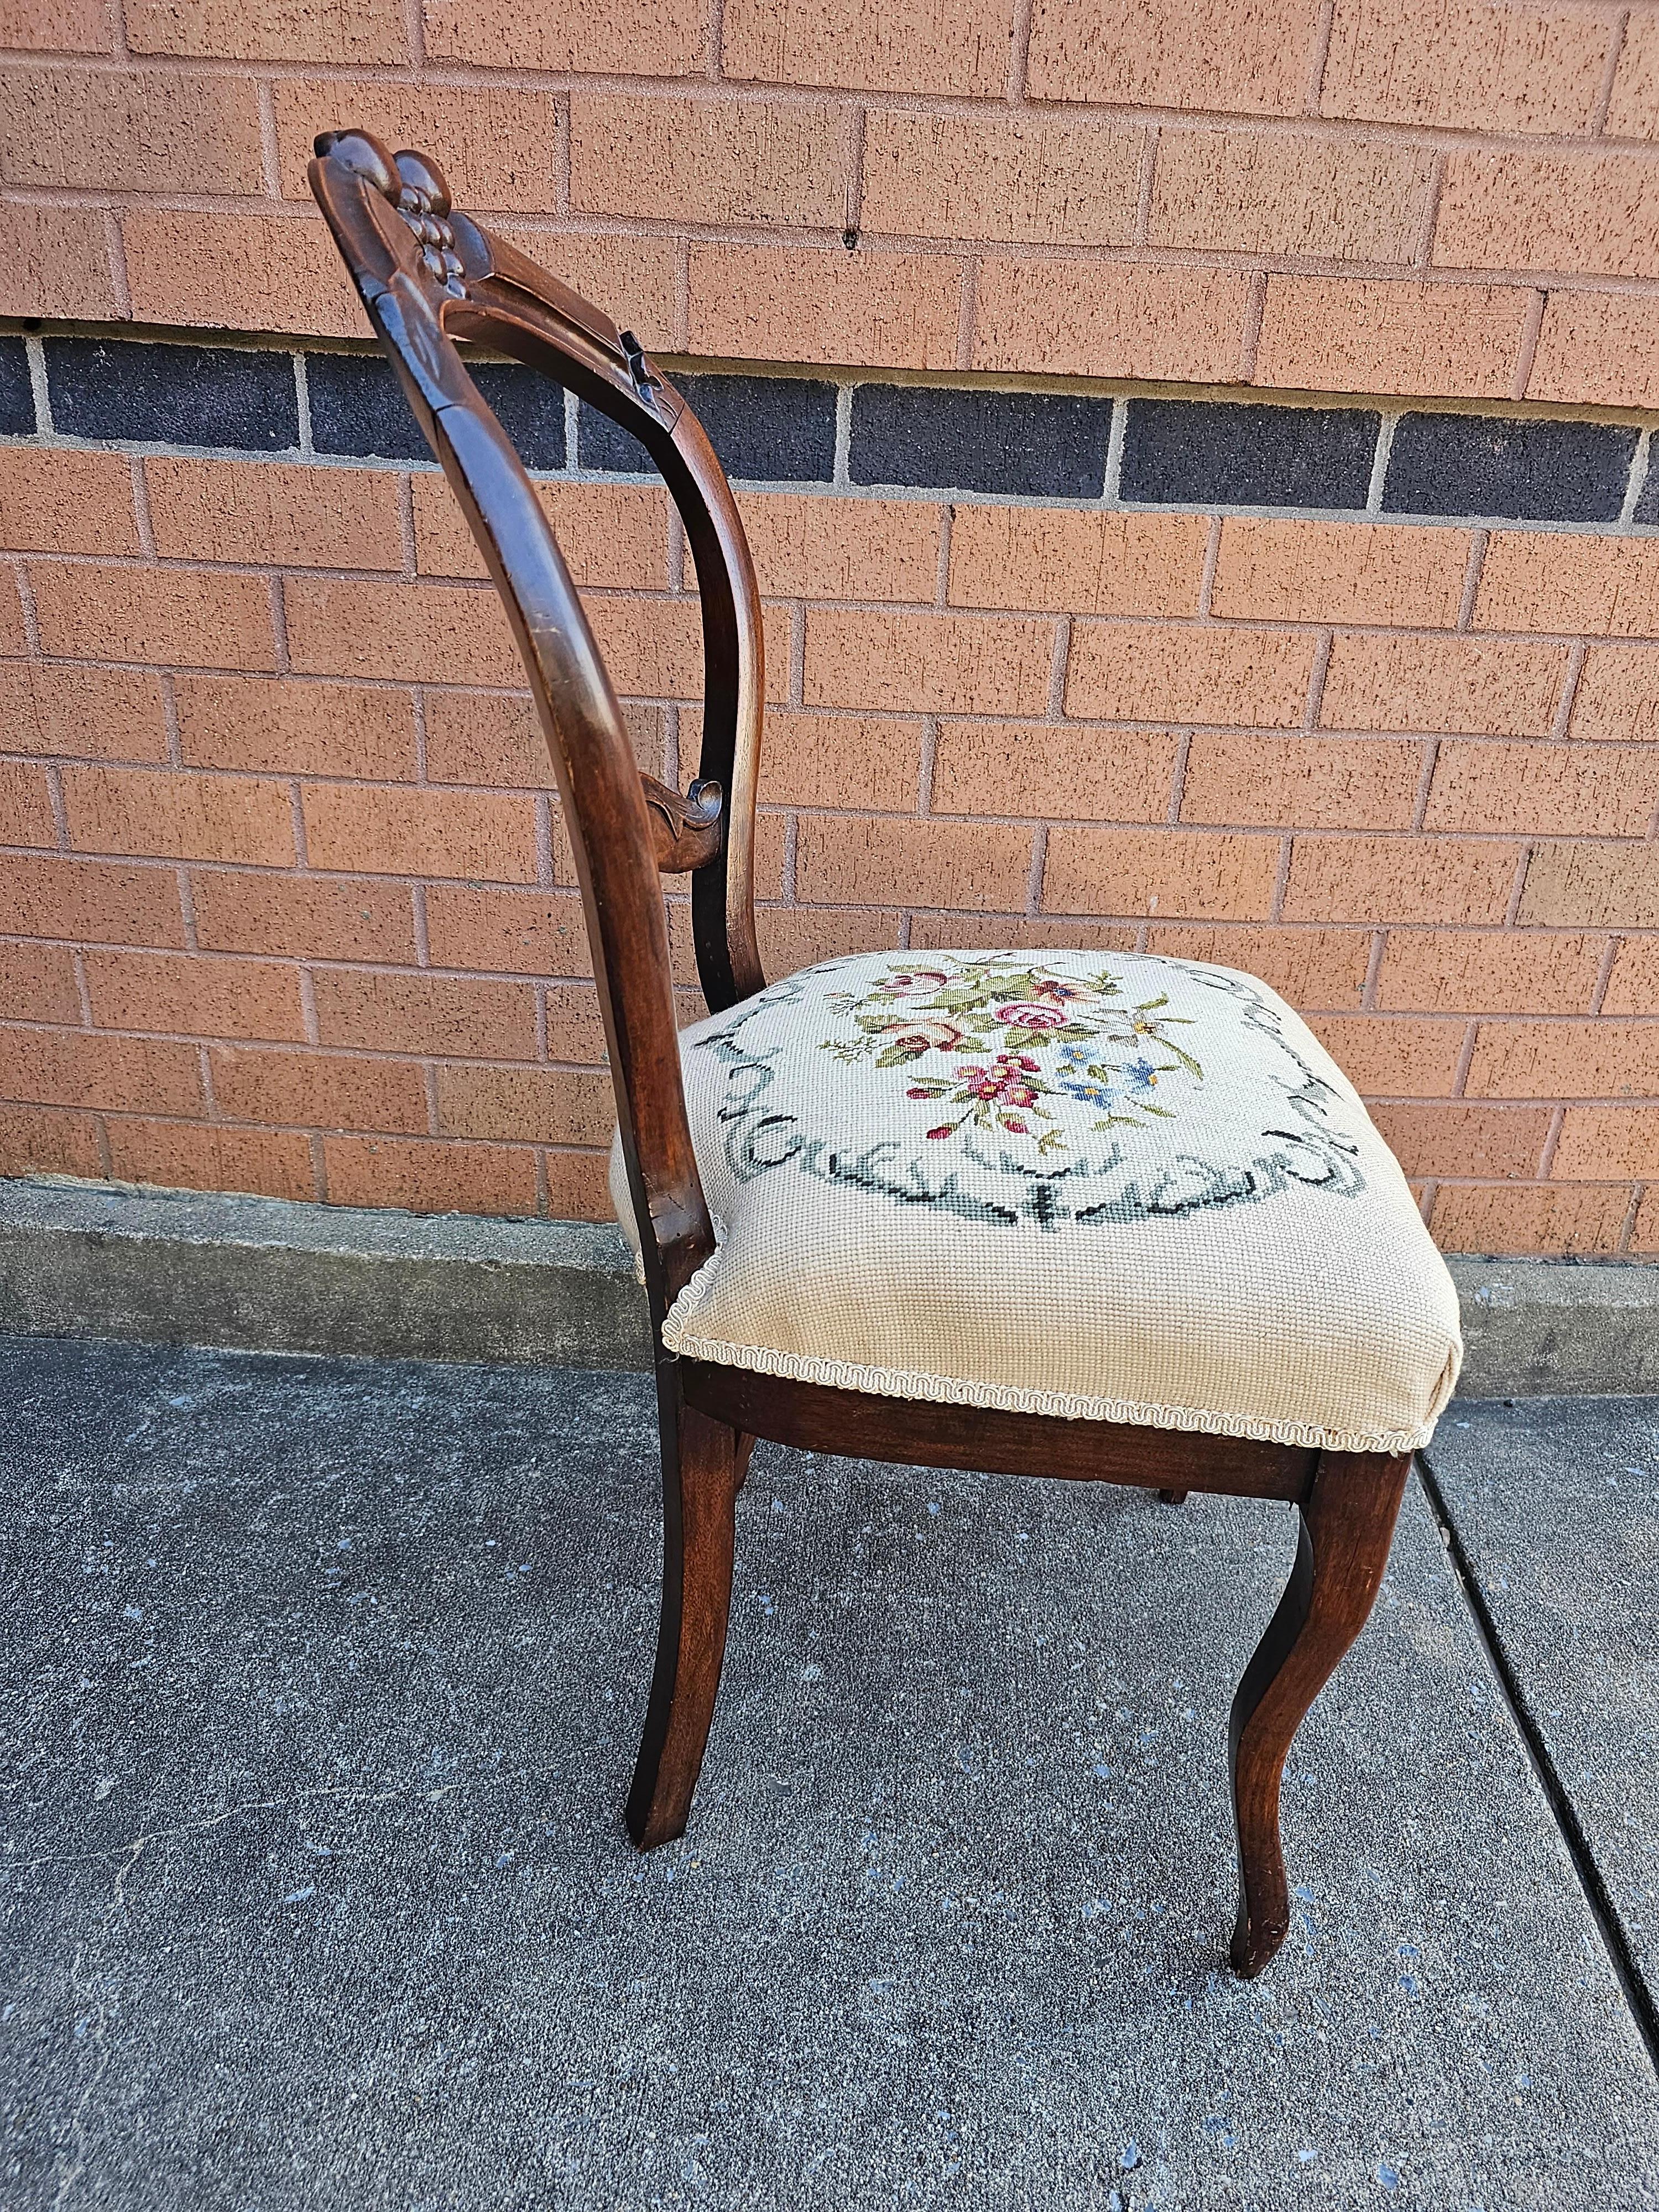 A gorgeous, fully refurbished Victorian Walnut Needlepoint Upholstered Side Chair in great antique condition. Very firm and comfortable seat. Measures 17